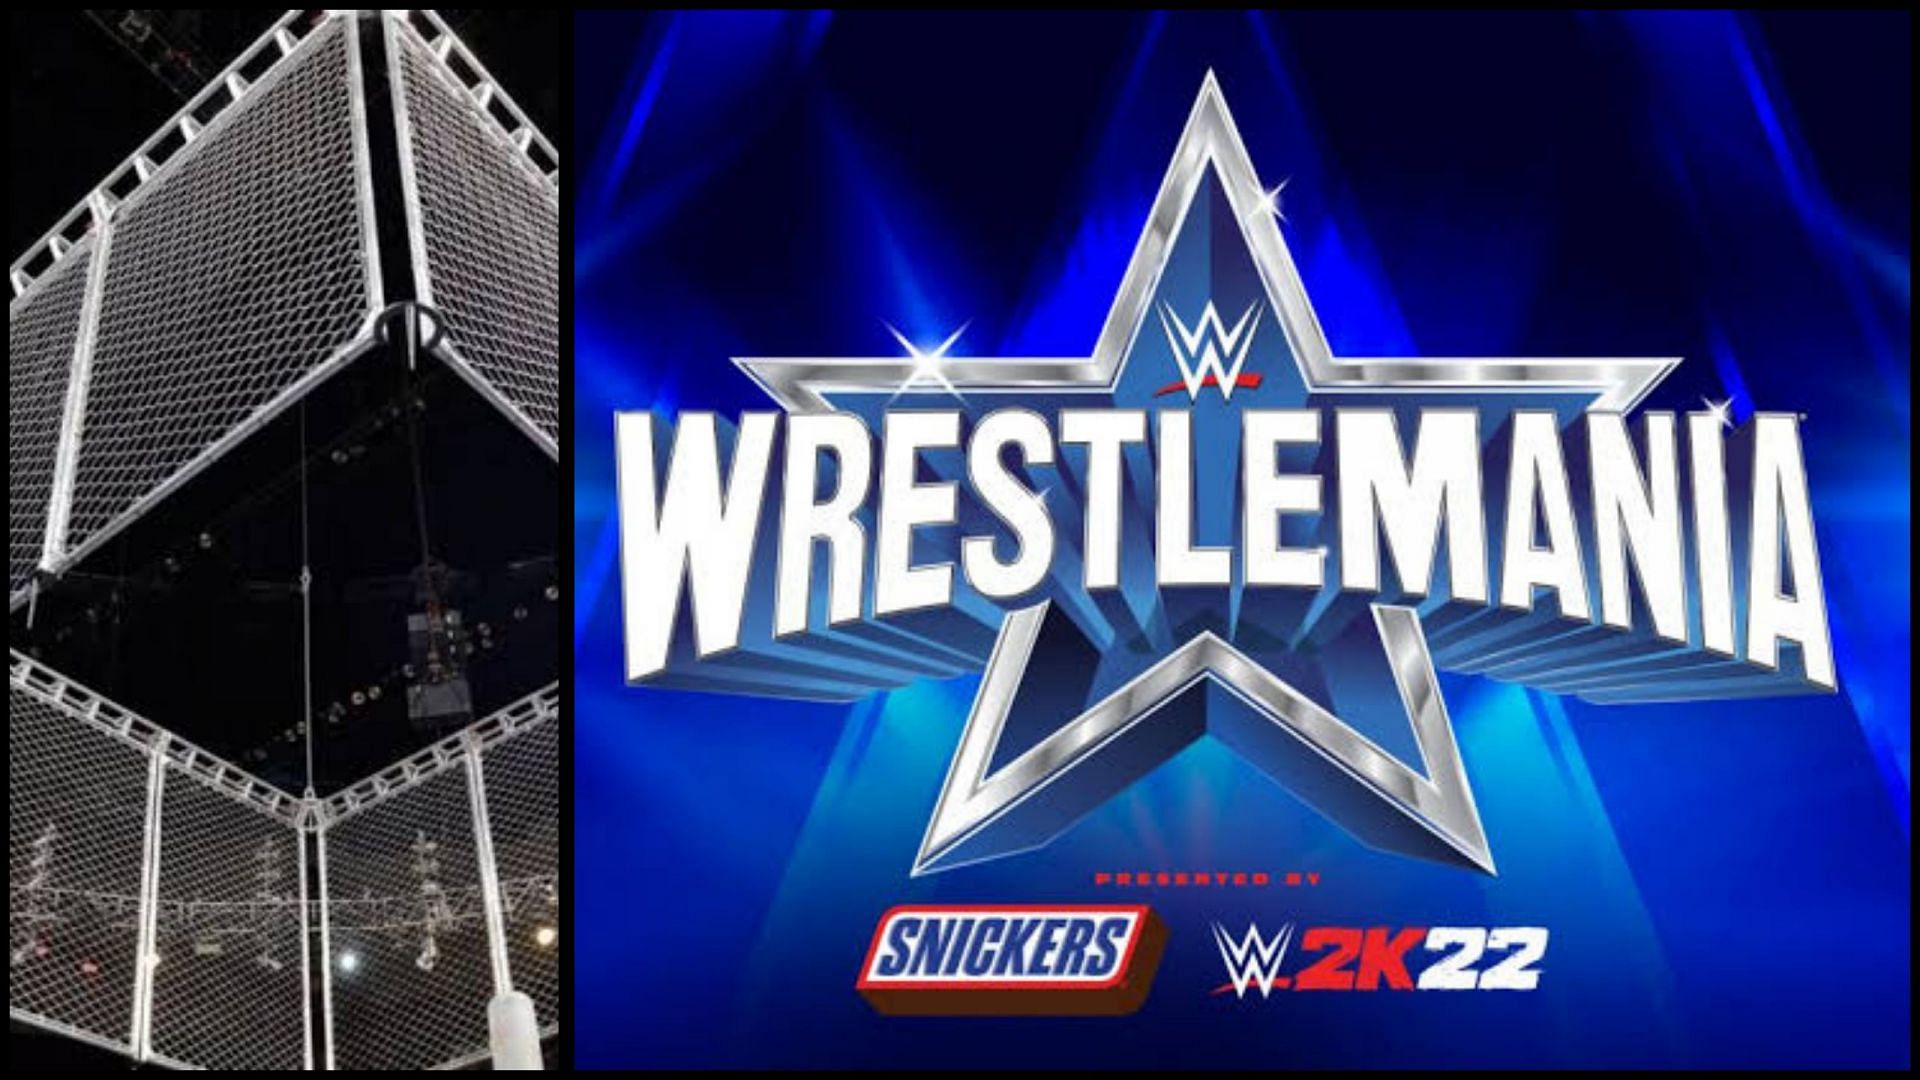 WrestleMania 38 will take place on the 2nd and 3rd of April